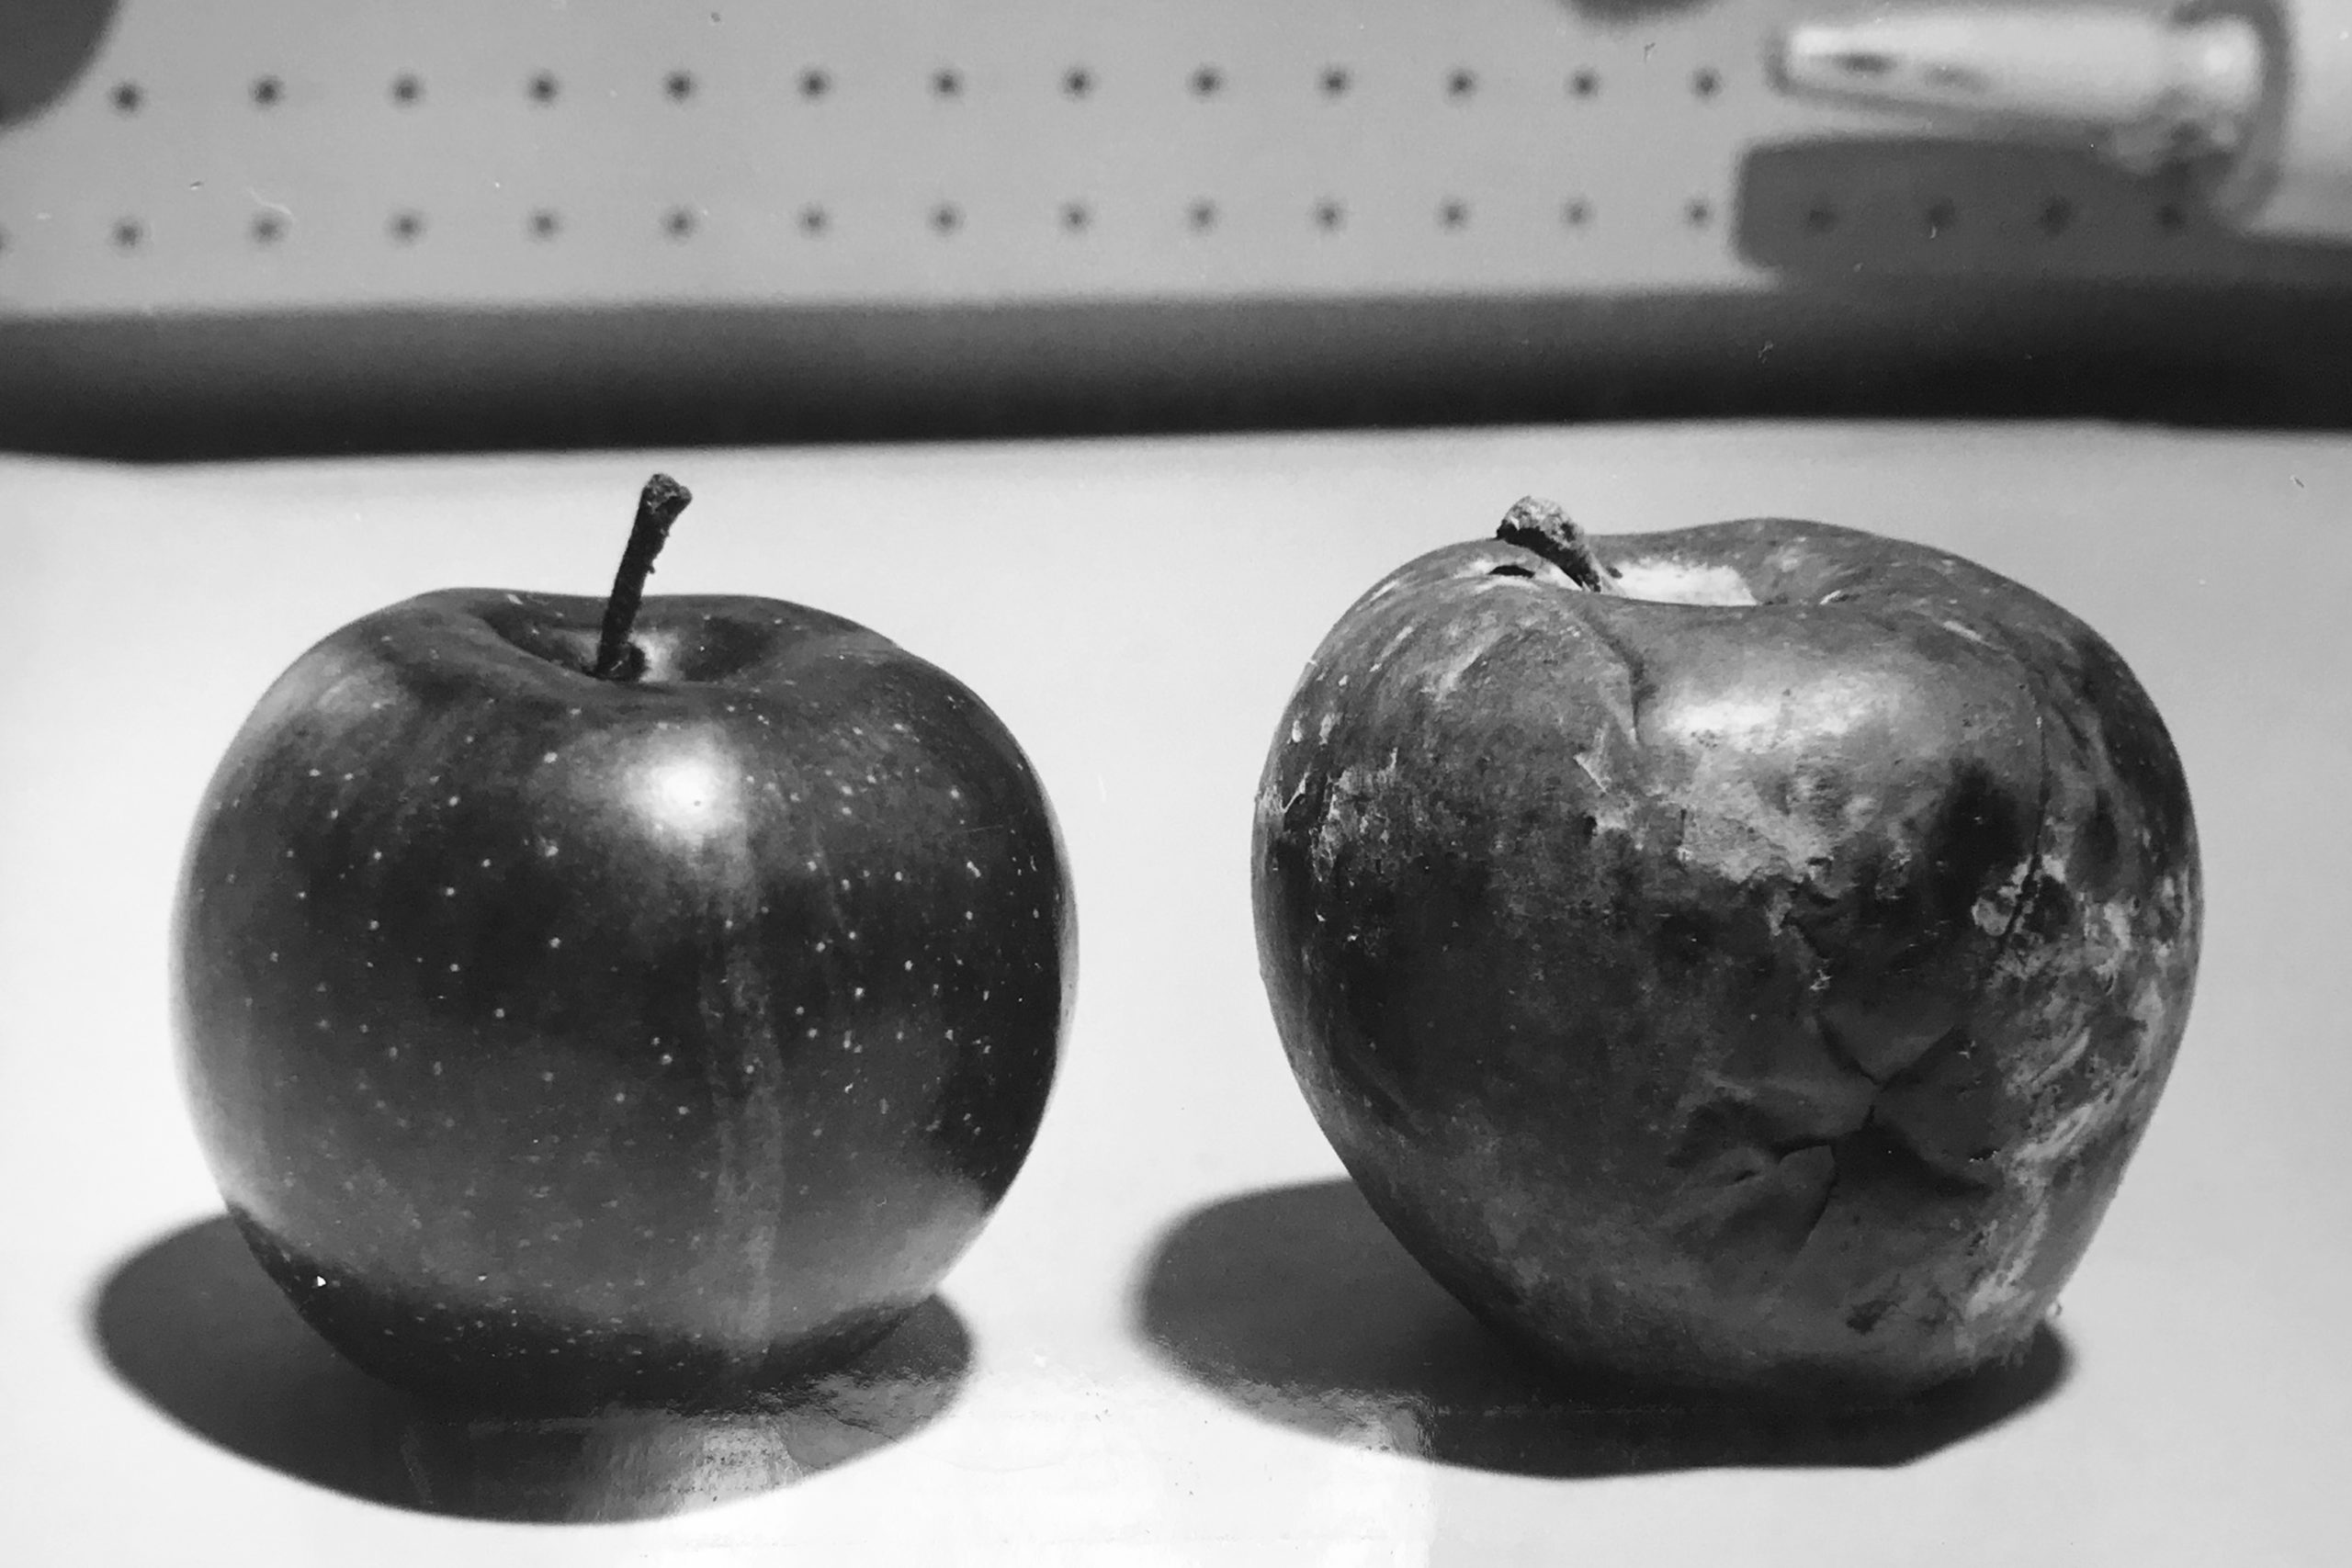 One healthy apple, and one rotten apple